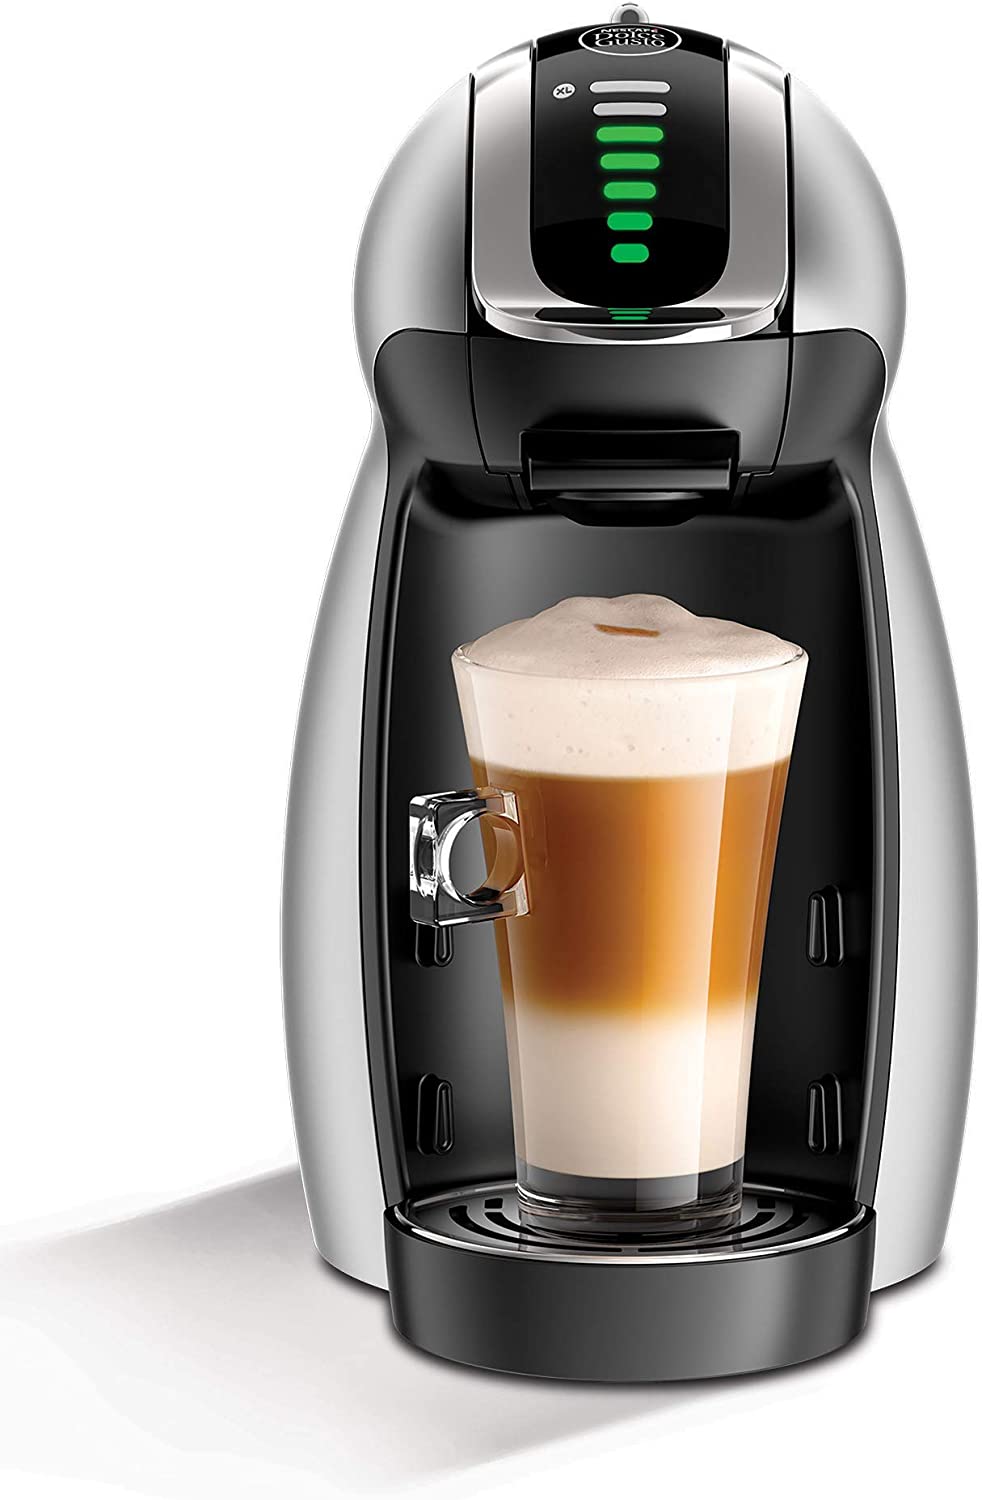 Dolce Gusto coffee maker